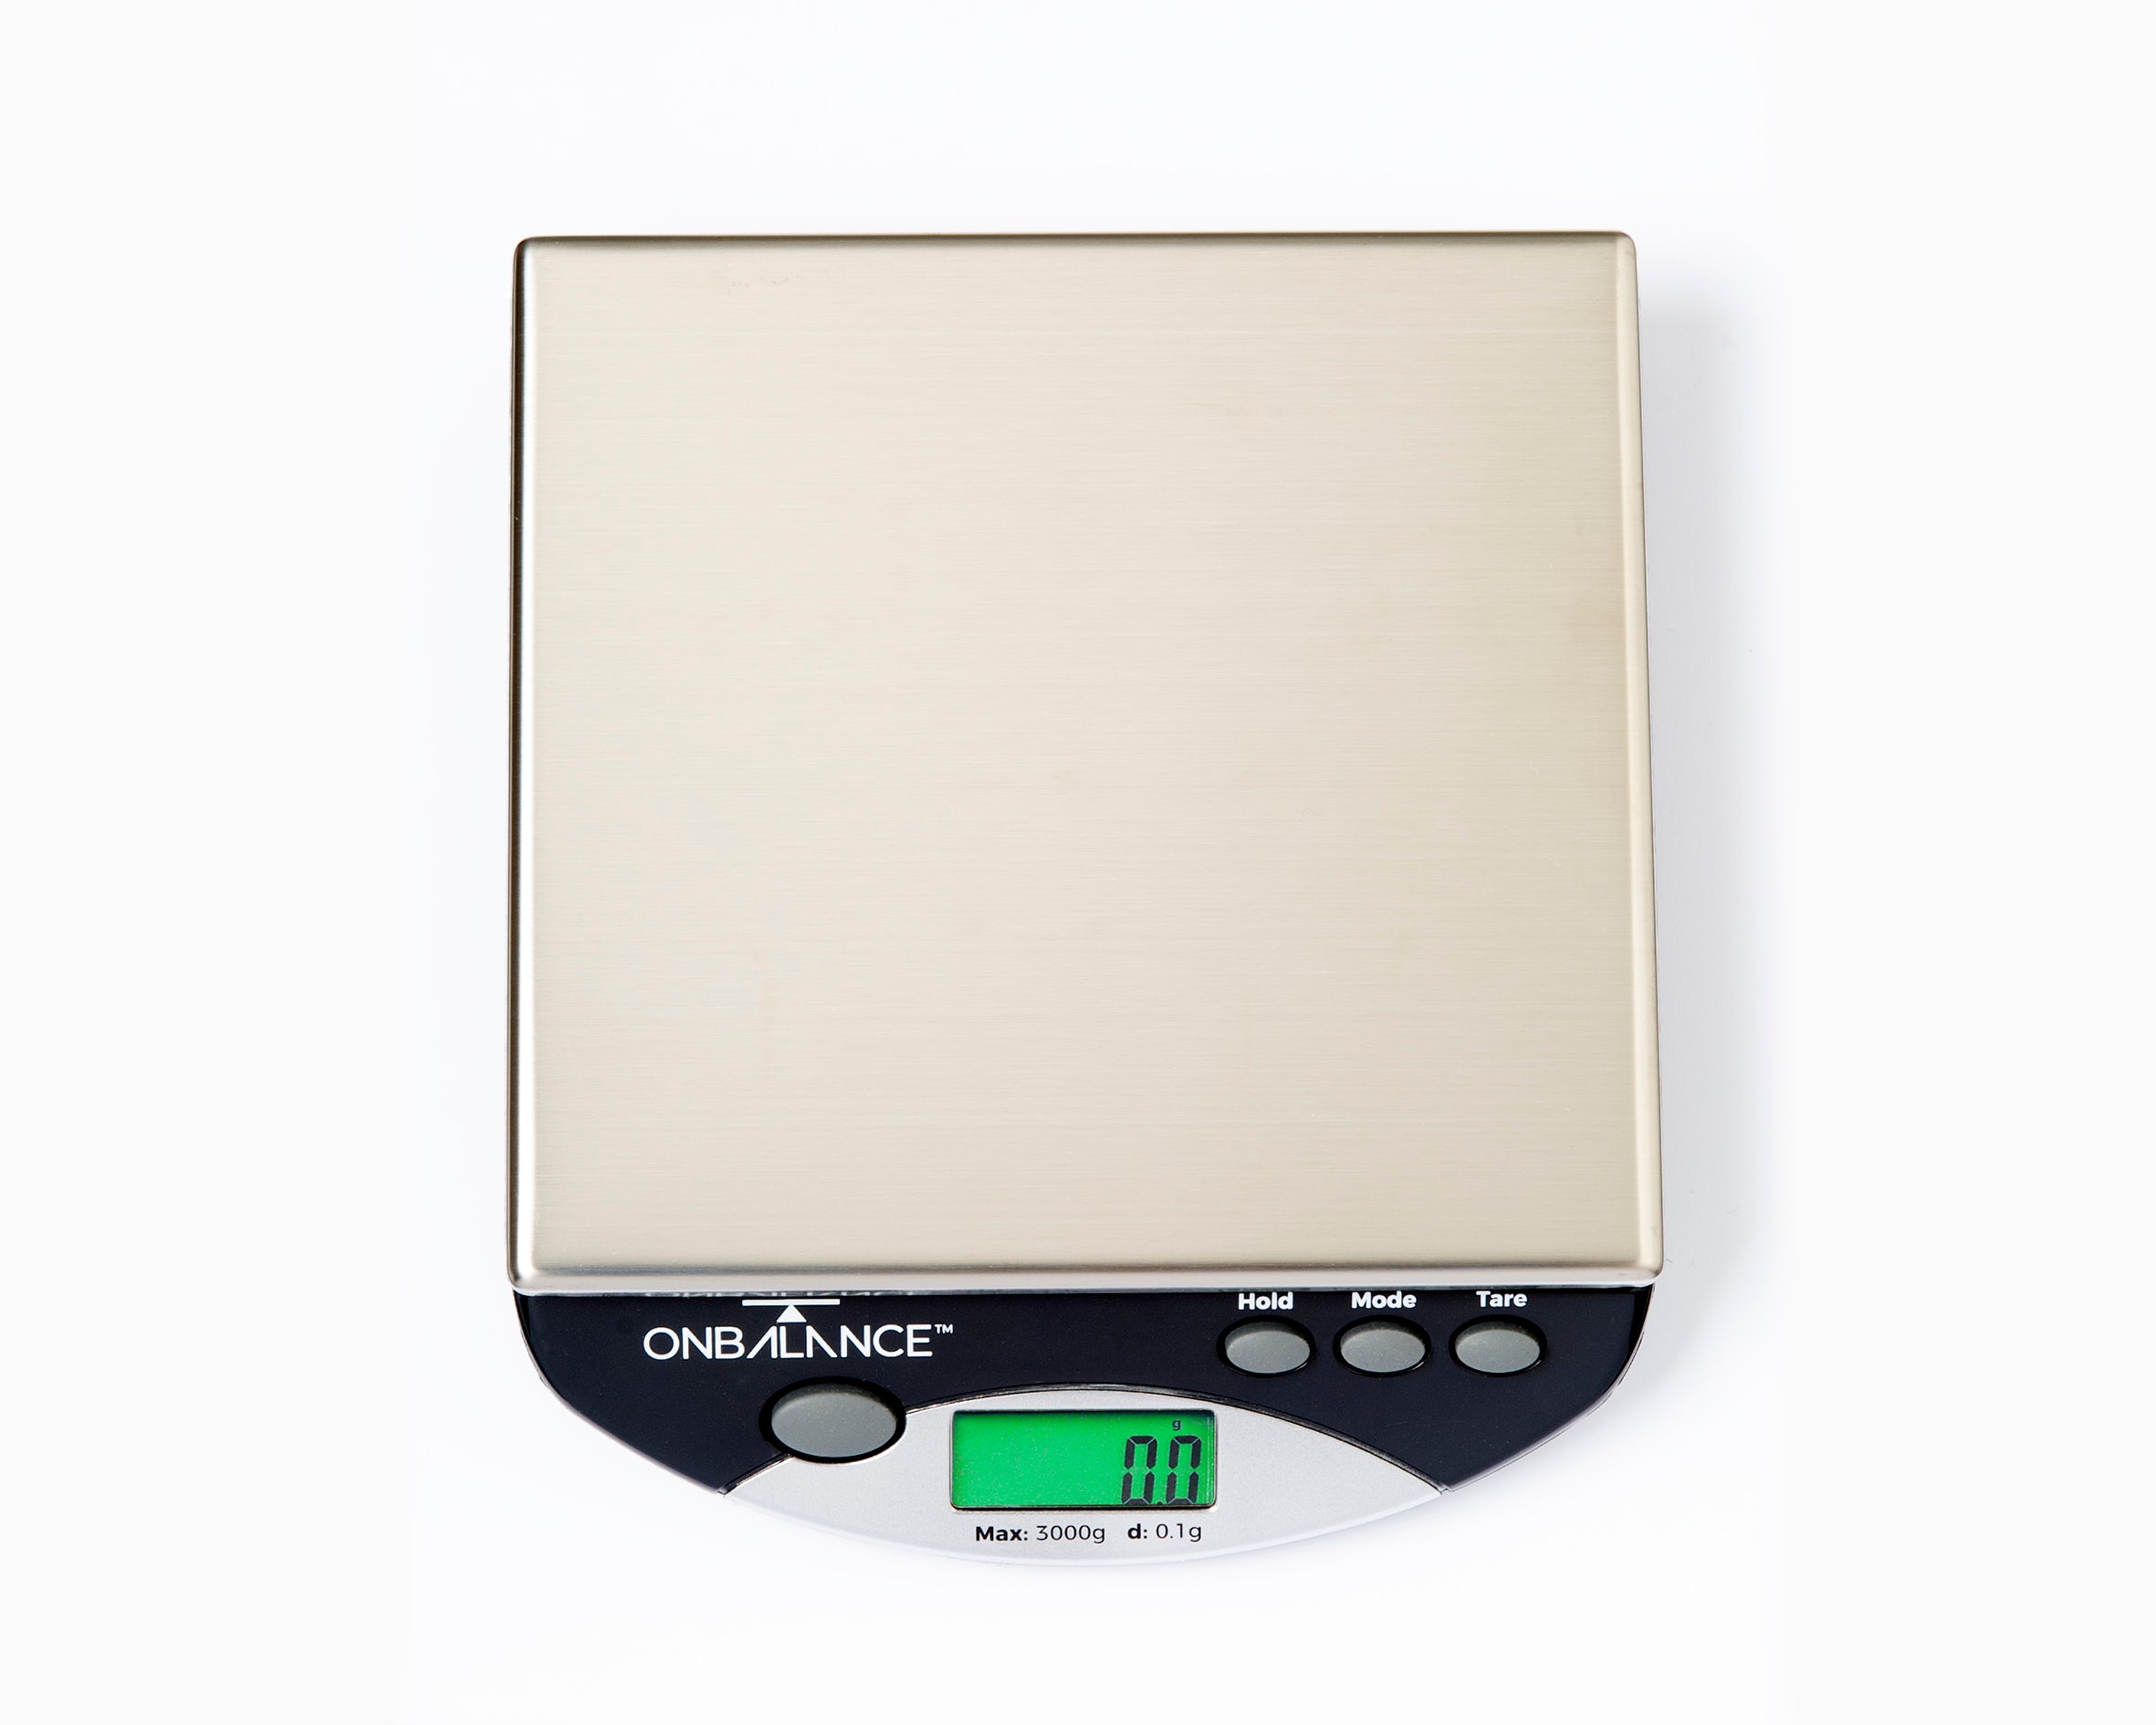 IS-600-BK Intrepid Series Compact Bench Scale - 600g x 0.01g